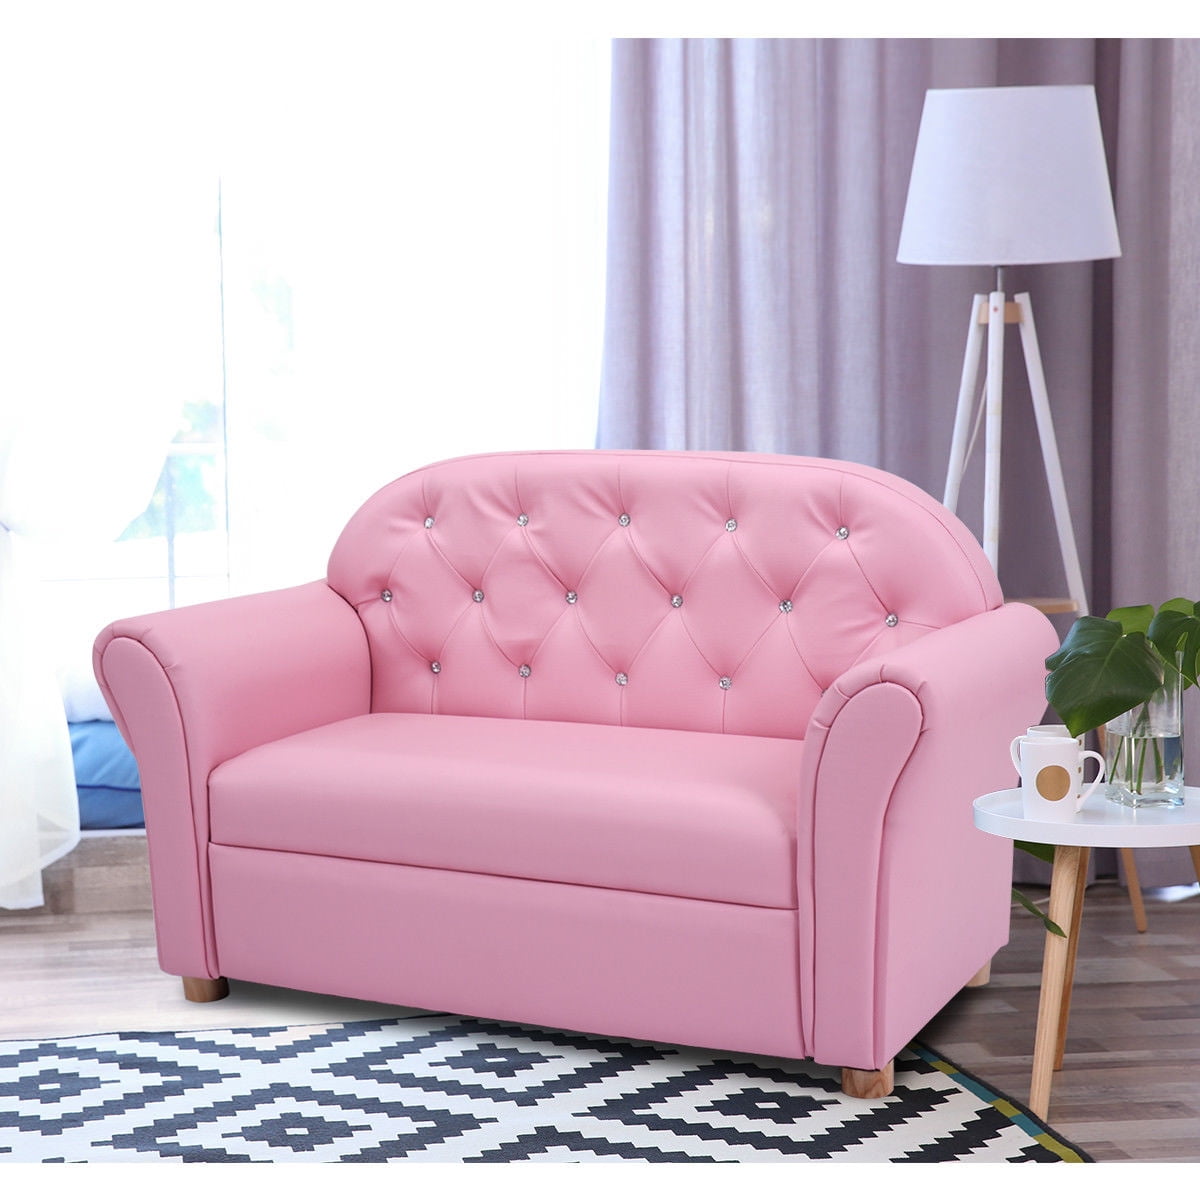 Kids Armrest Tufted Upholstered Princess Sofa Chair for Kids Child Stoarge Couch 